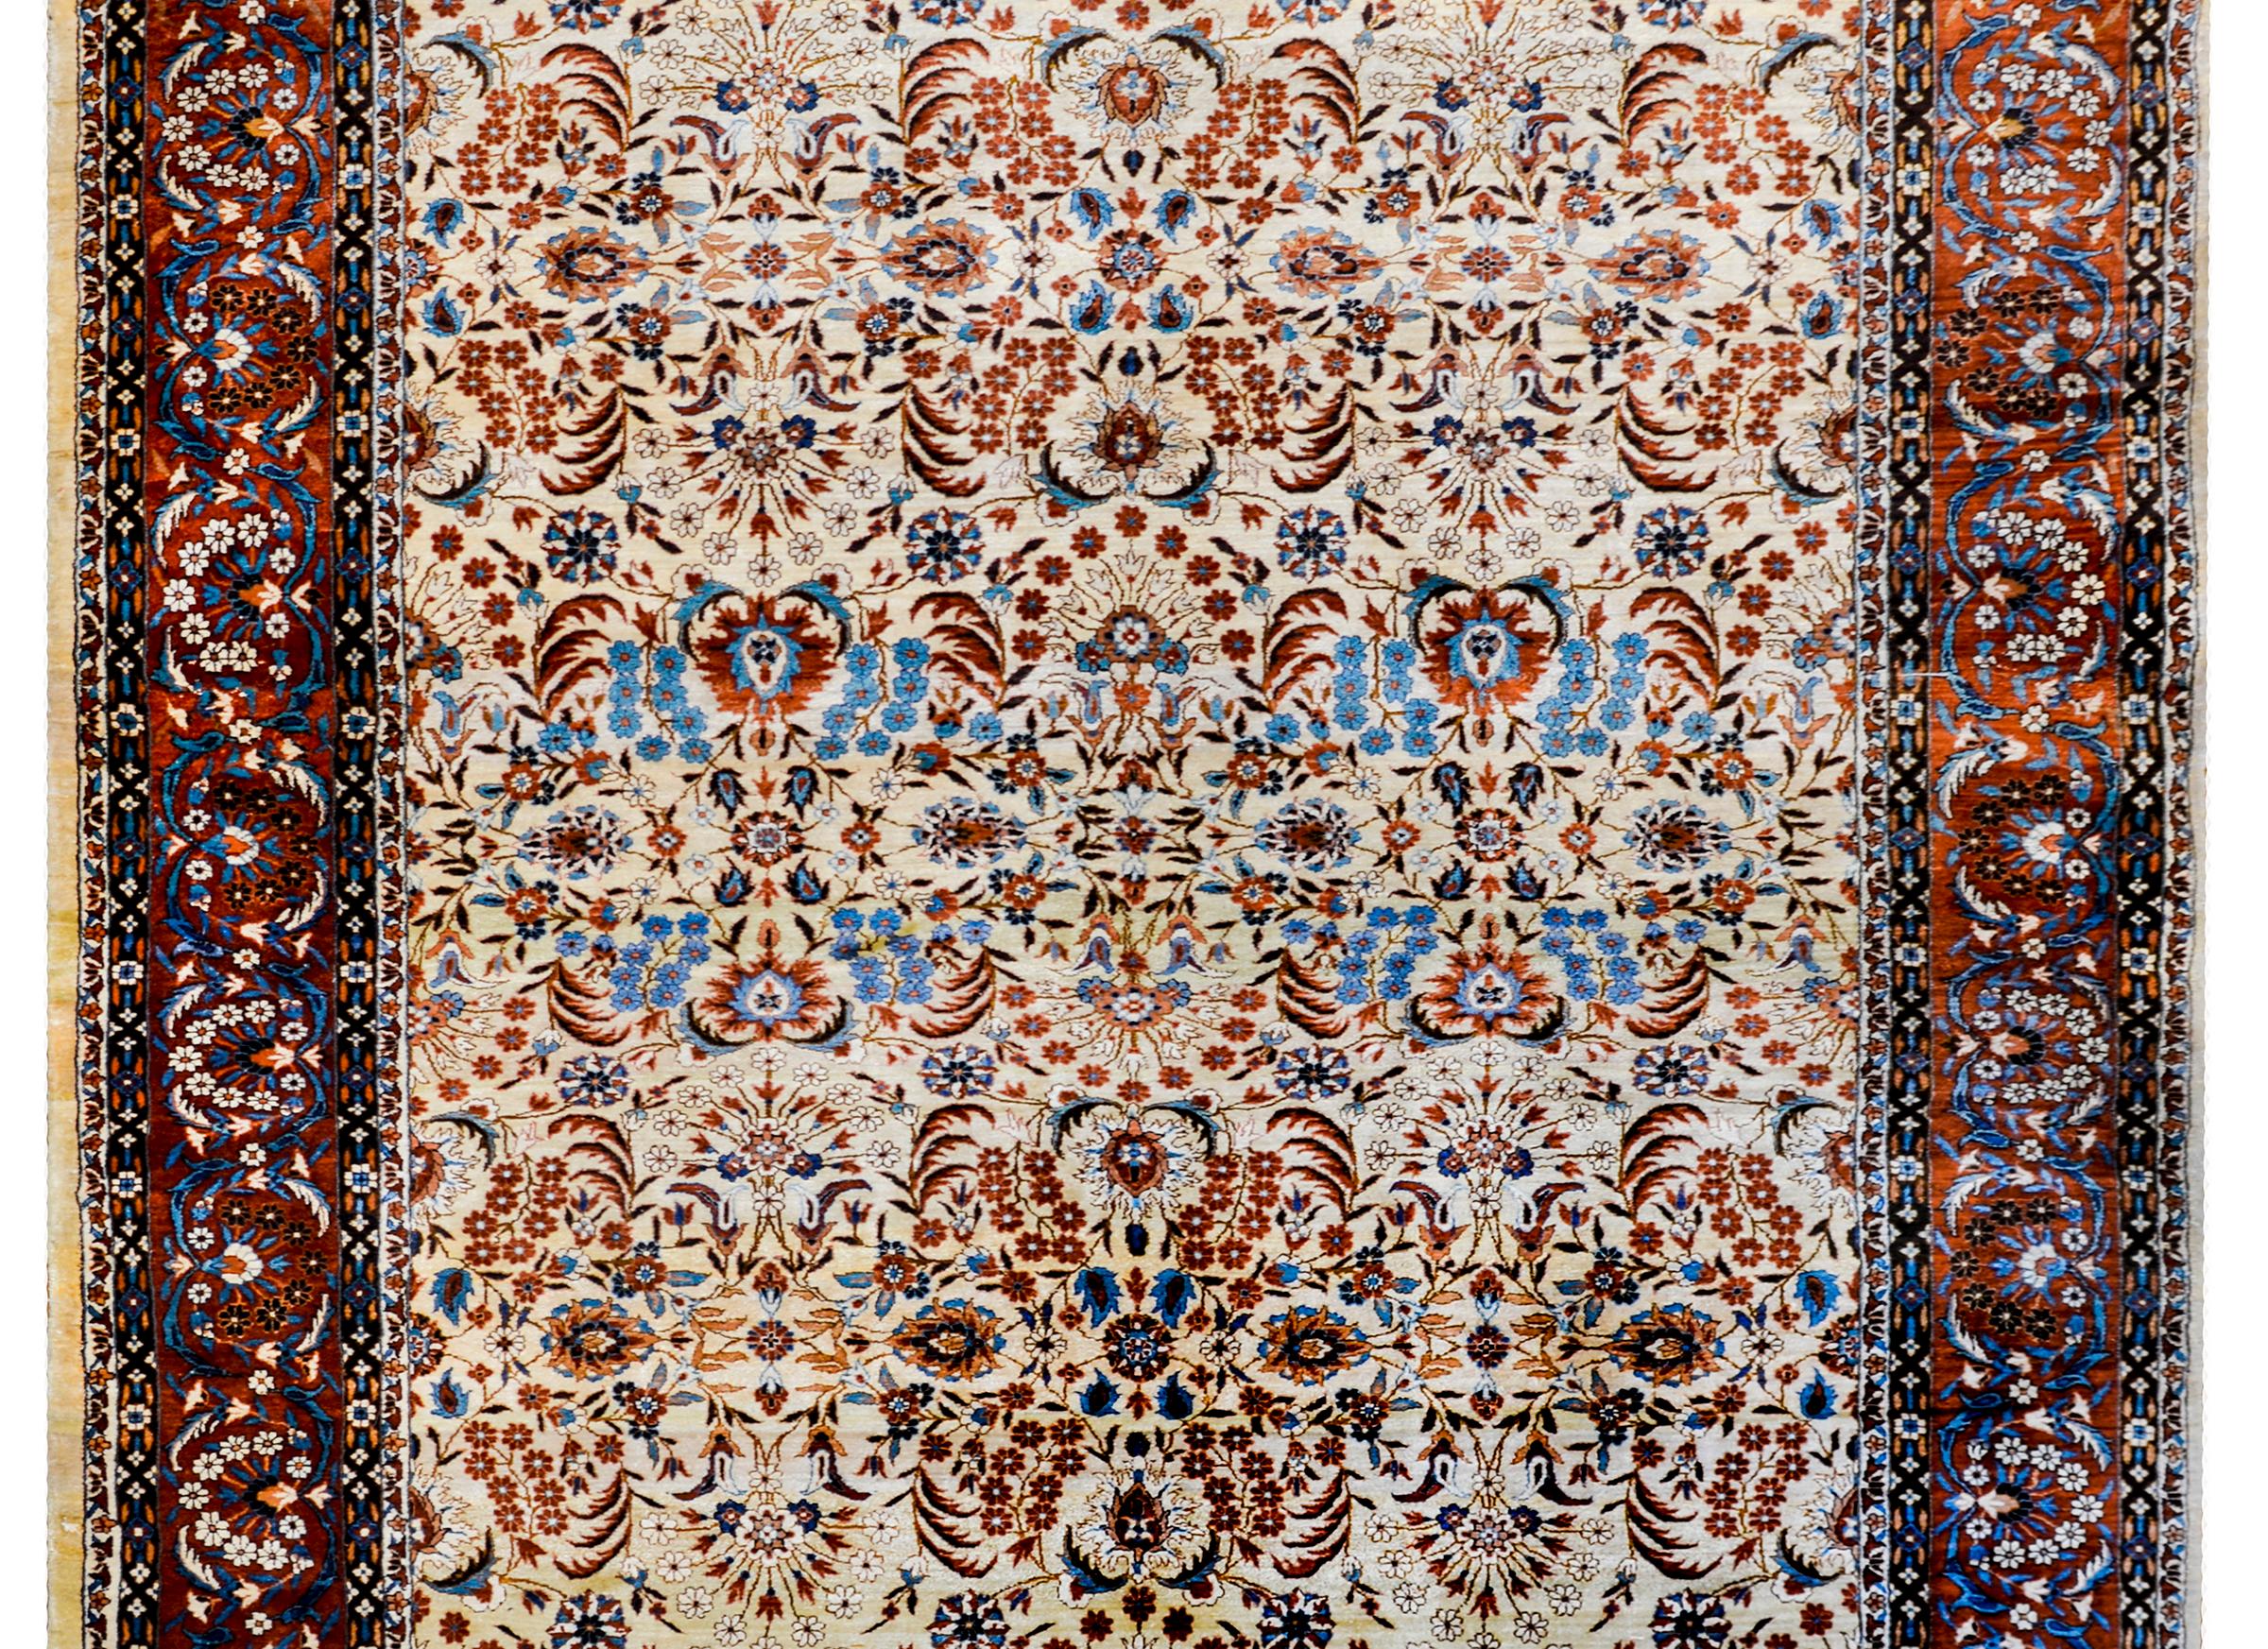 An incredible vintage Chinese silk rug with a beautiful bold floral pattern woven in crimson, rust, light and dark indigo, cream, and white colored vegetable dyed wool. The border is similarly patterned with a wide central floral stripe flanked by